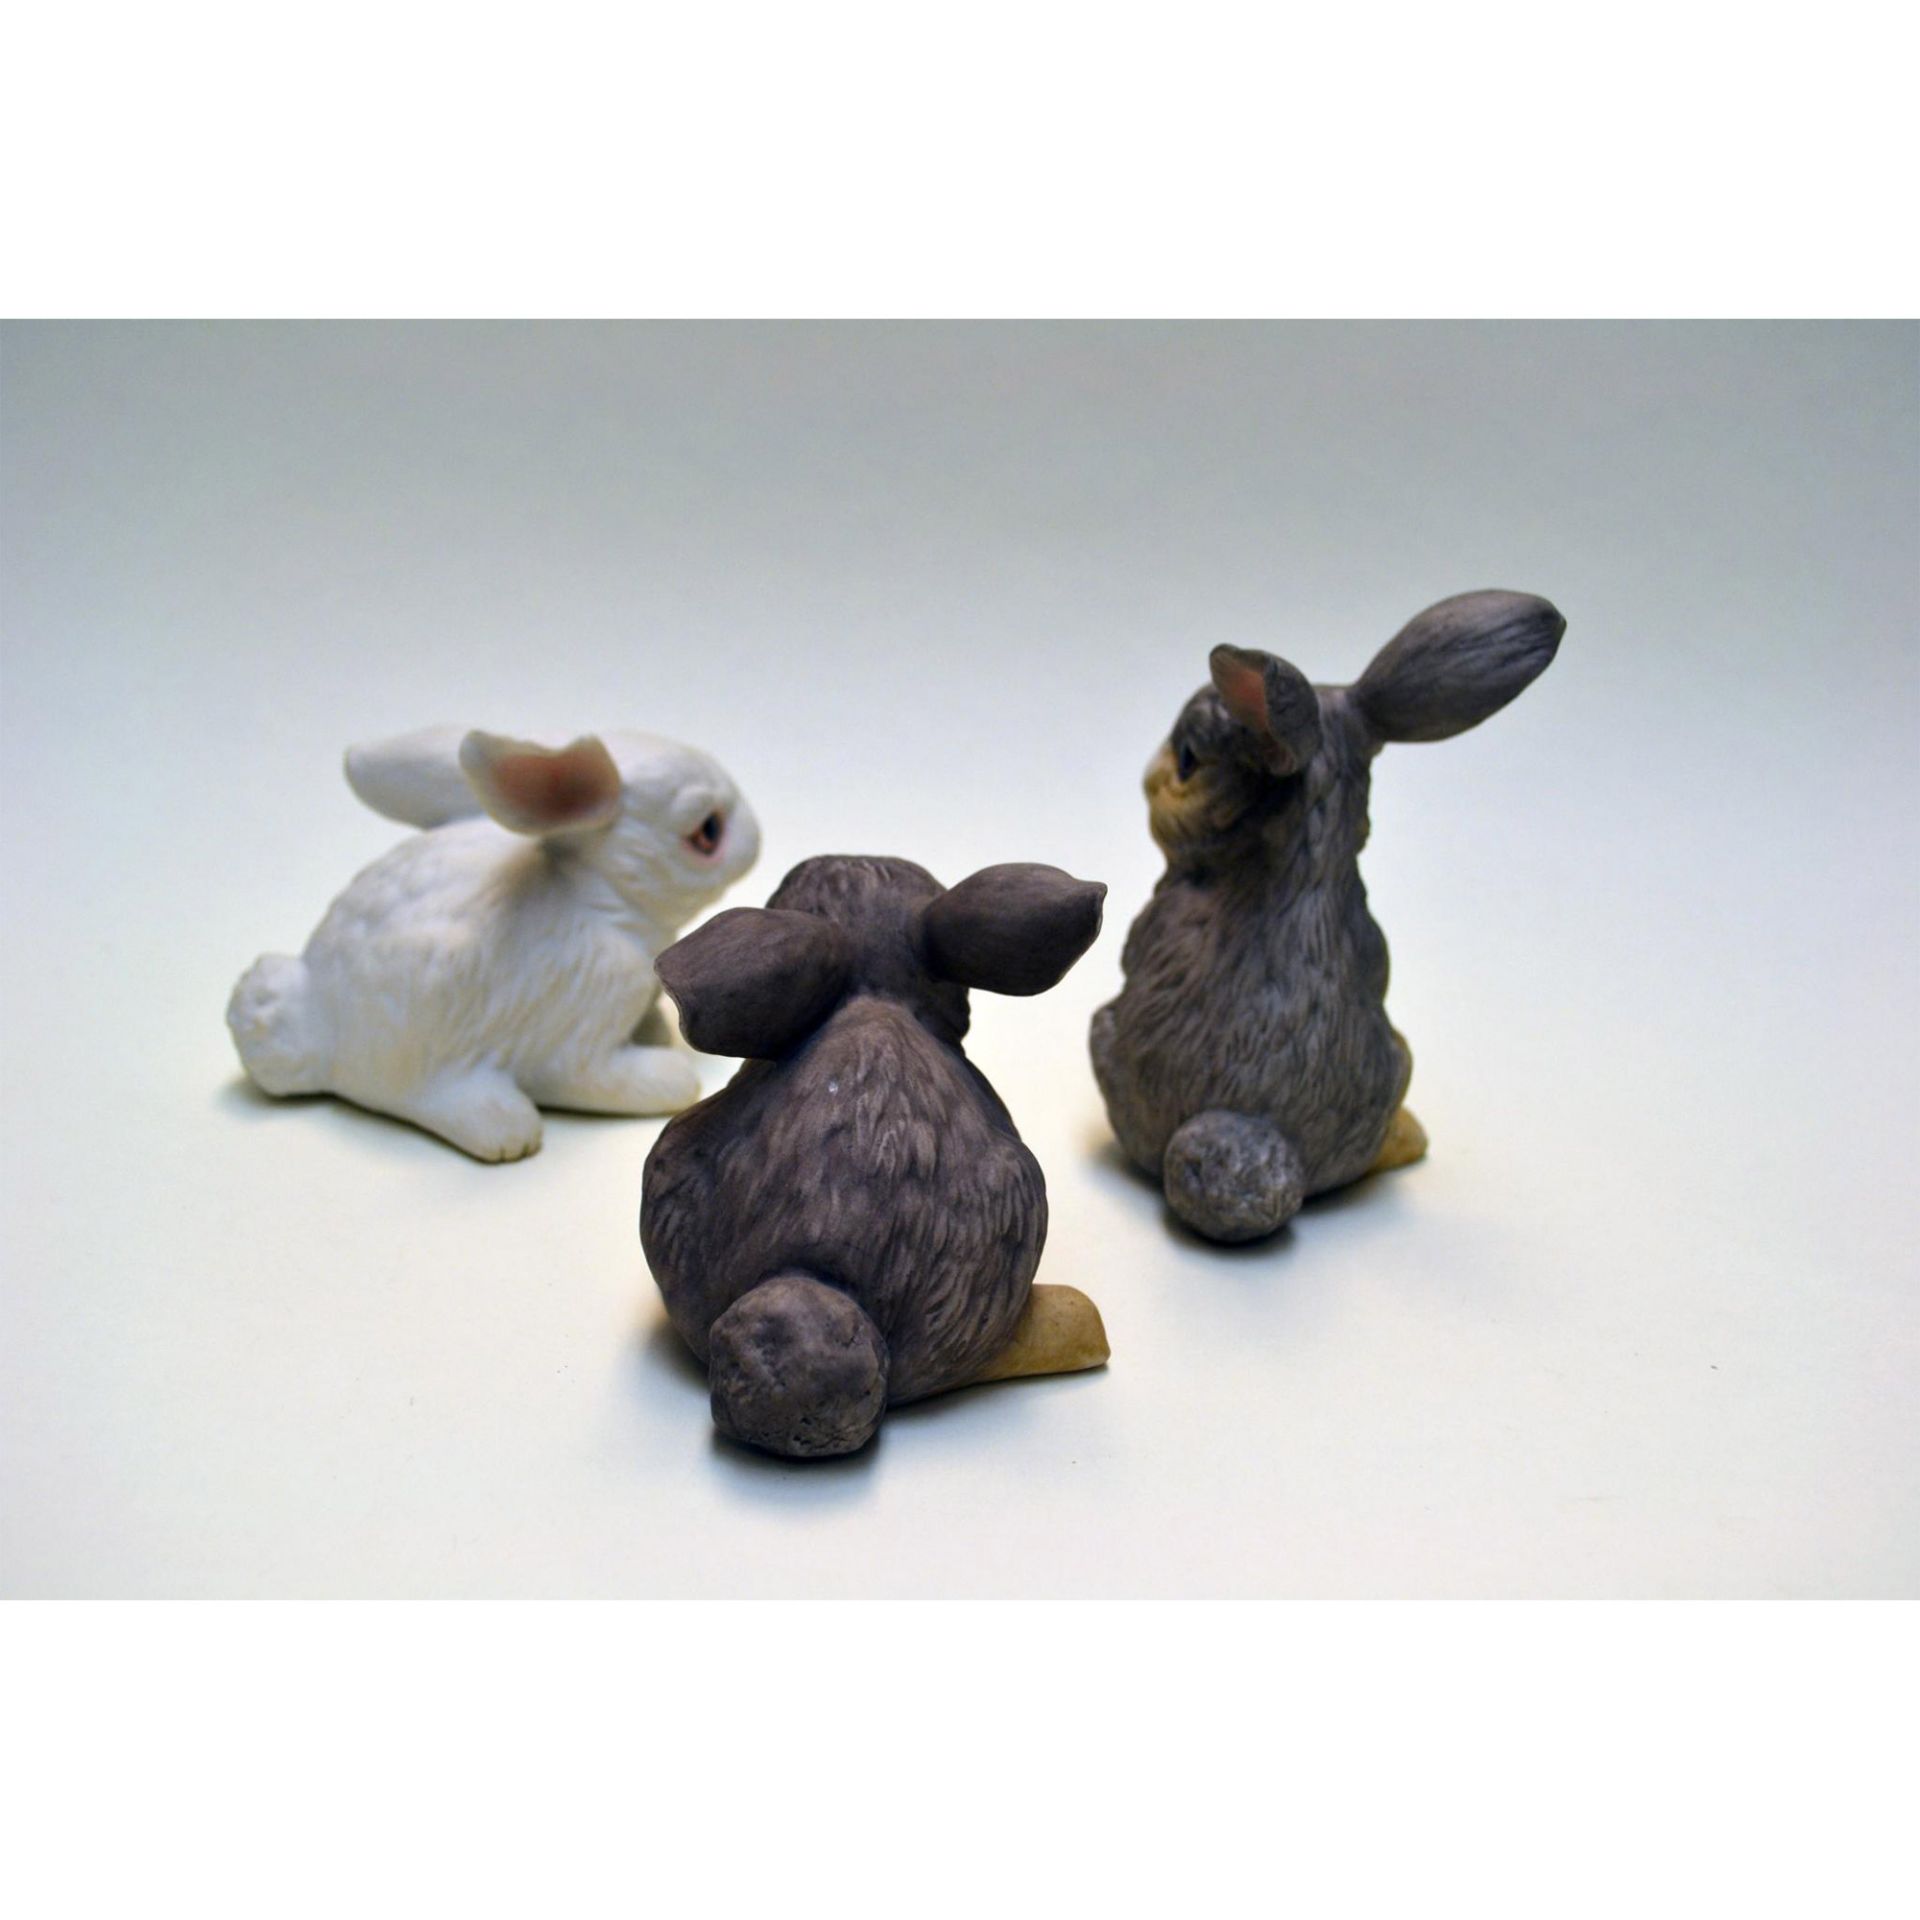 Boehm Porcelain Rabbits, Sitting And At Rest, White & Wild Figurines, 3 Pcs - Image 6 of 6